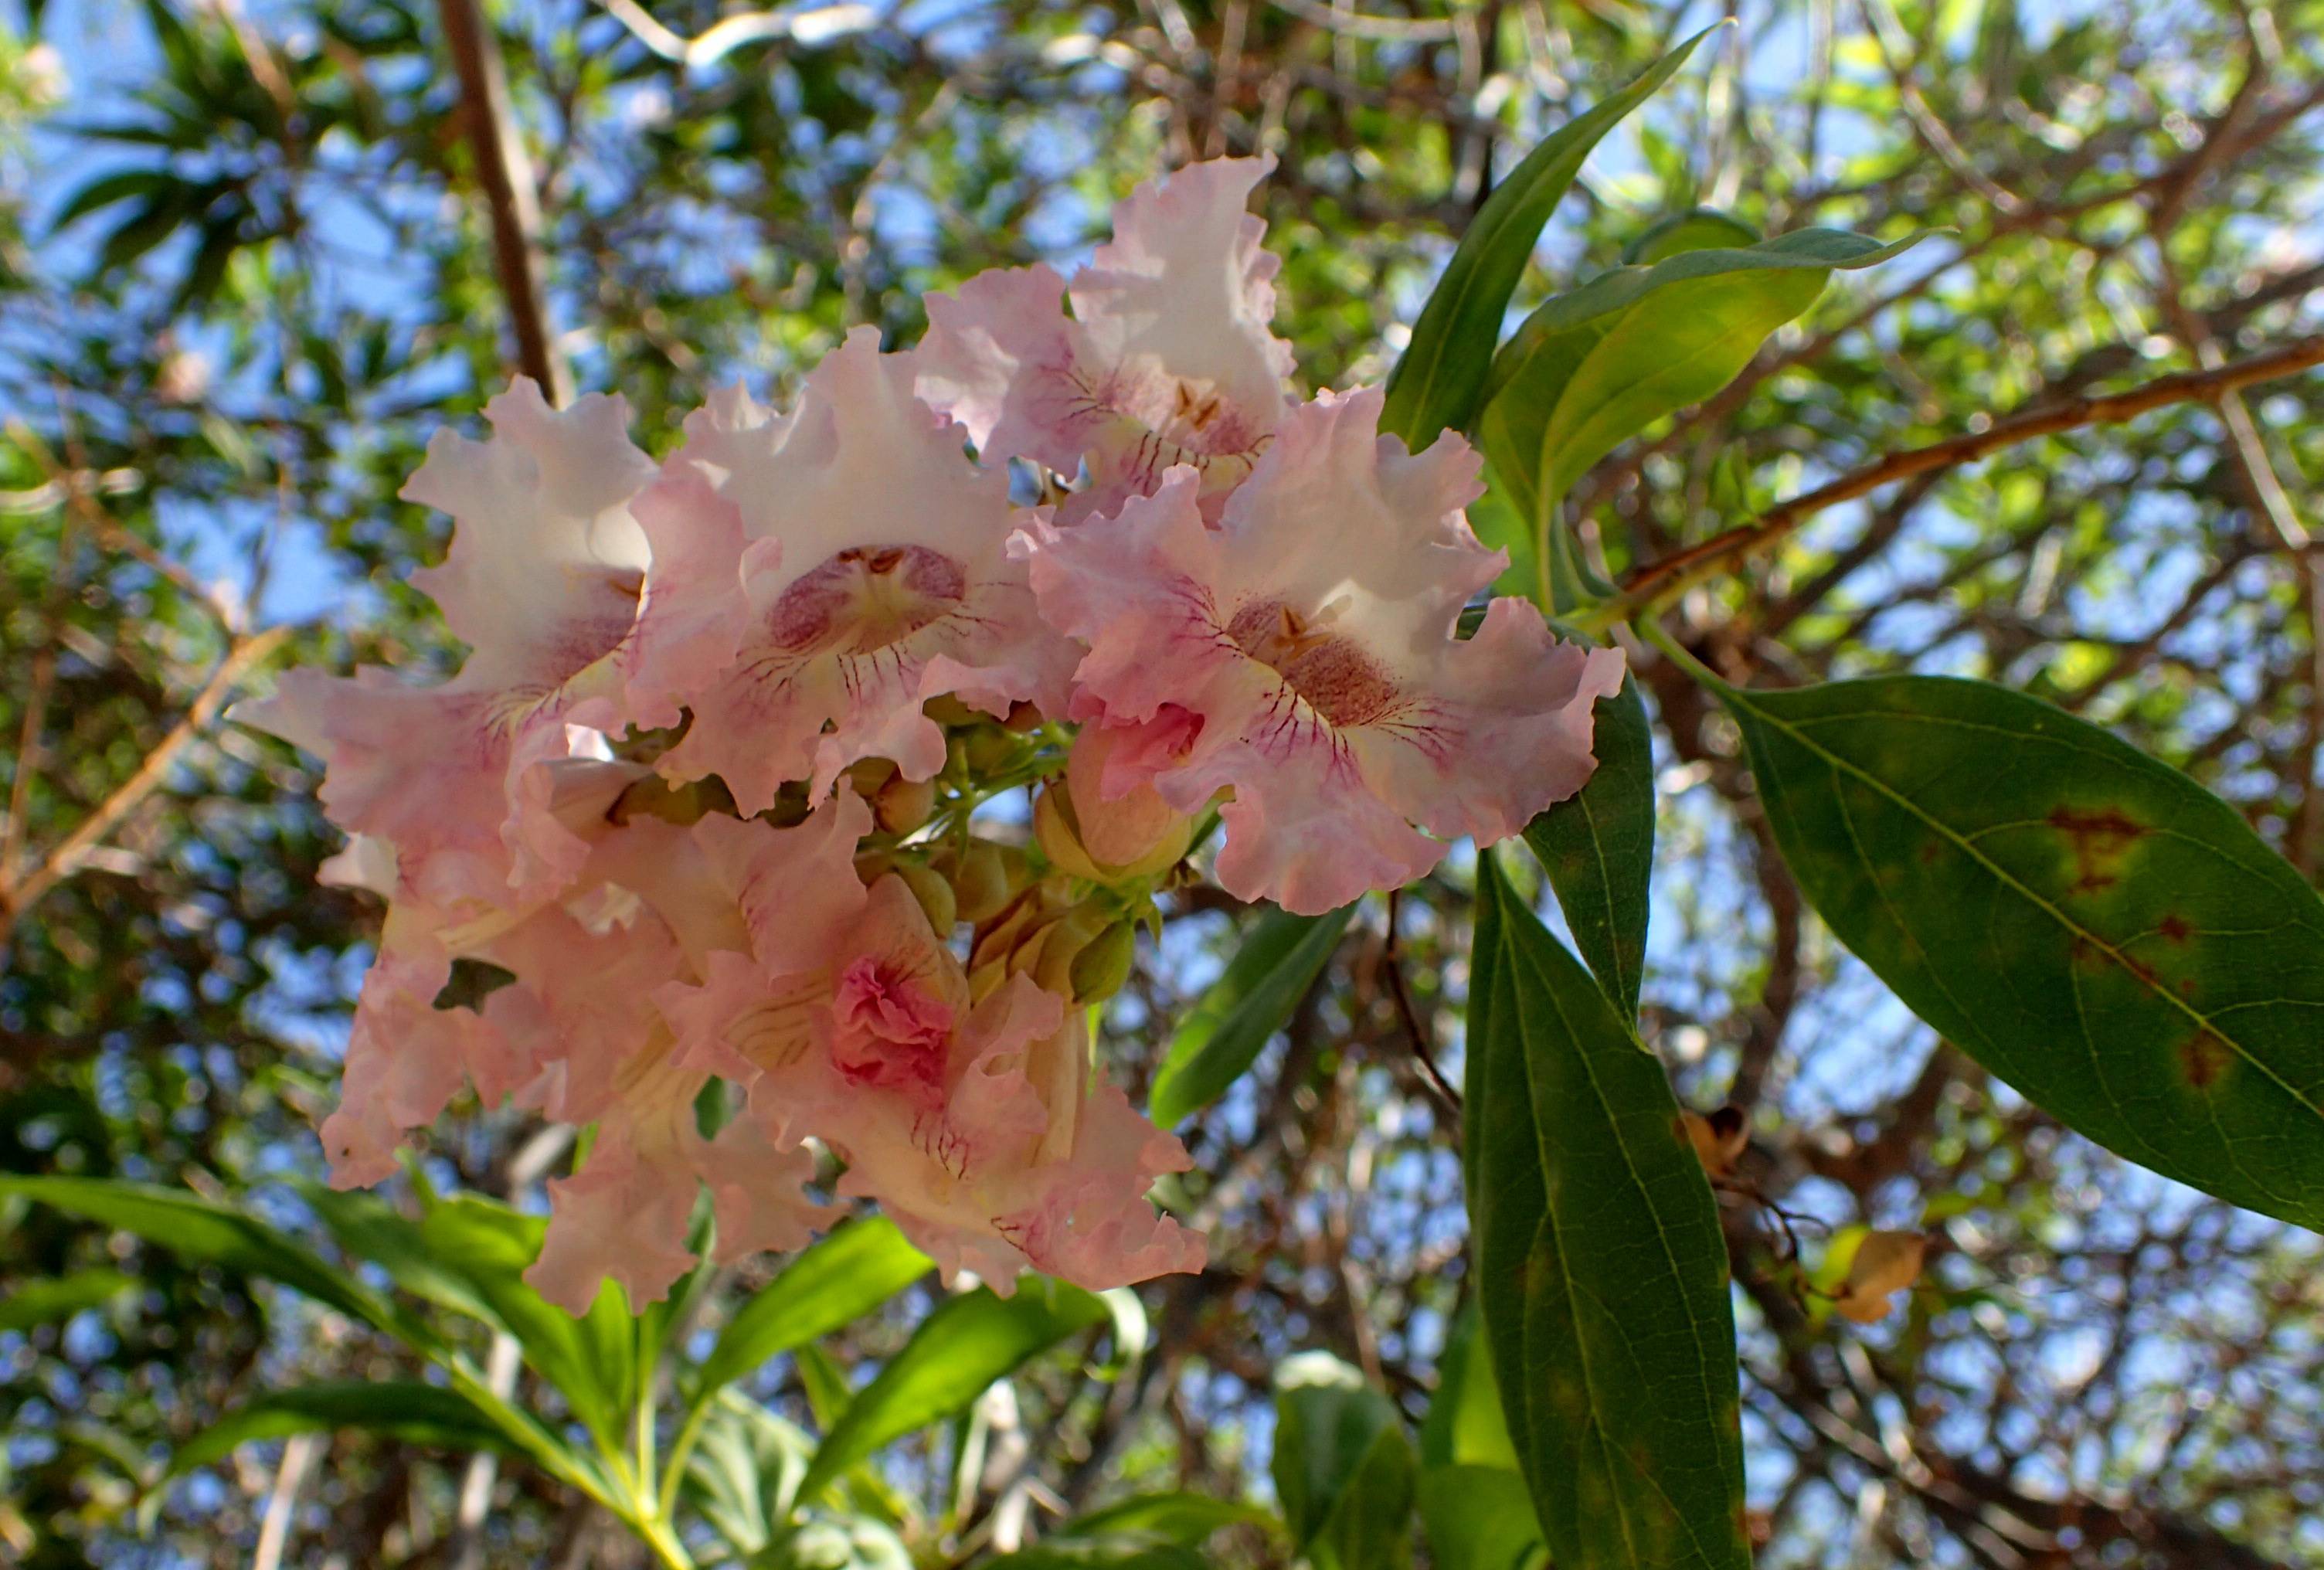 pink-white flowers with pink center, green leaves and brown branches